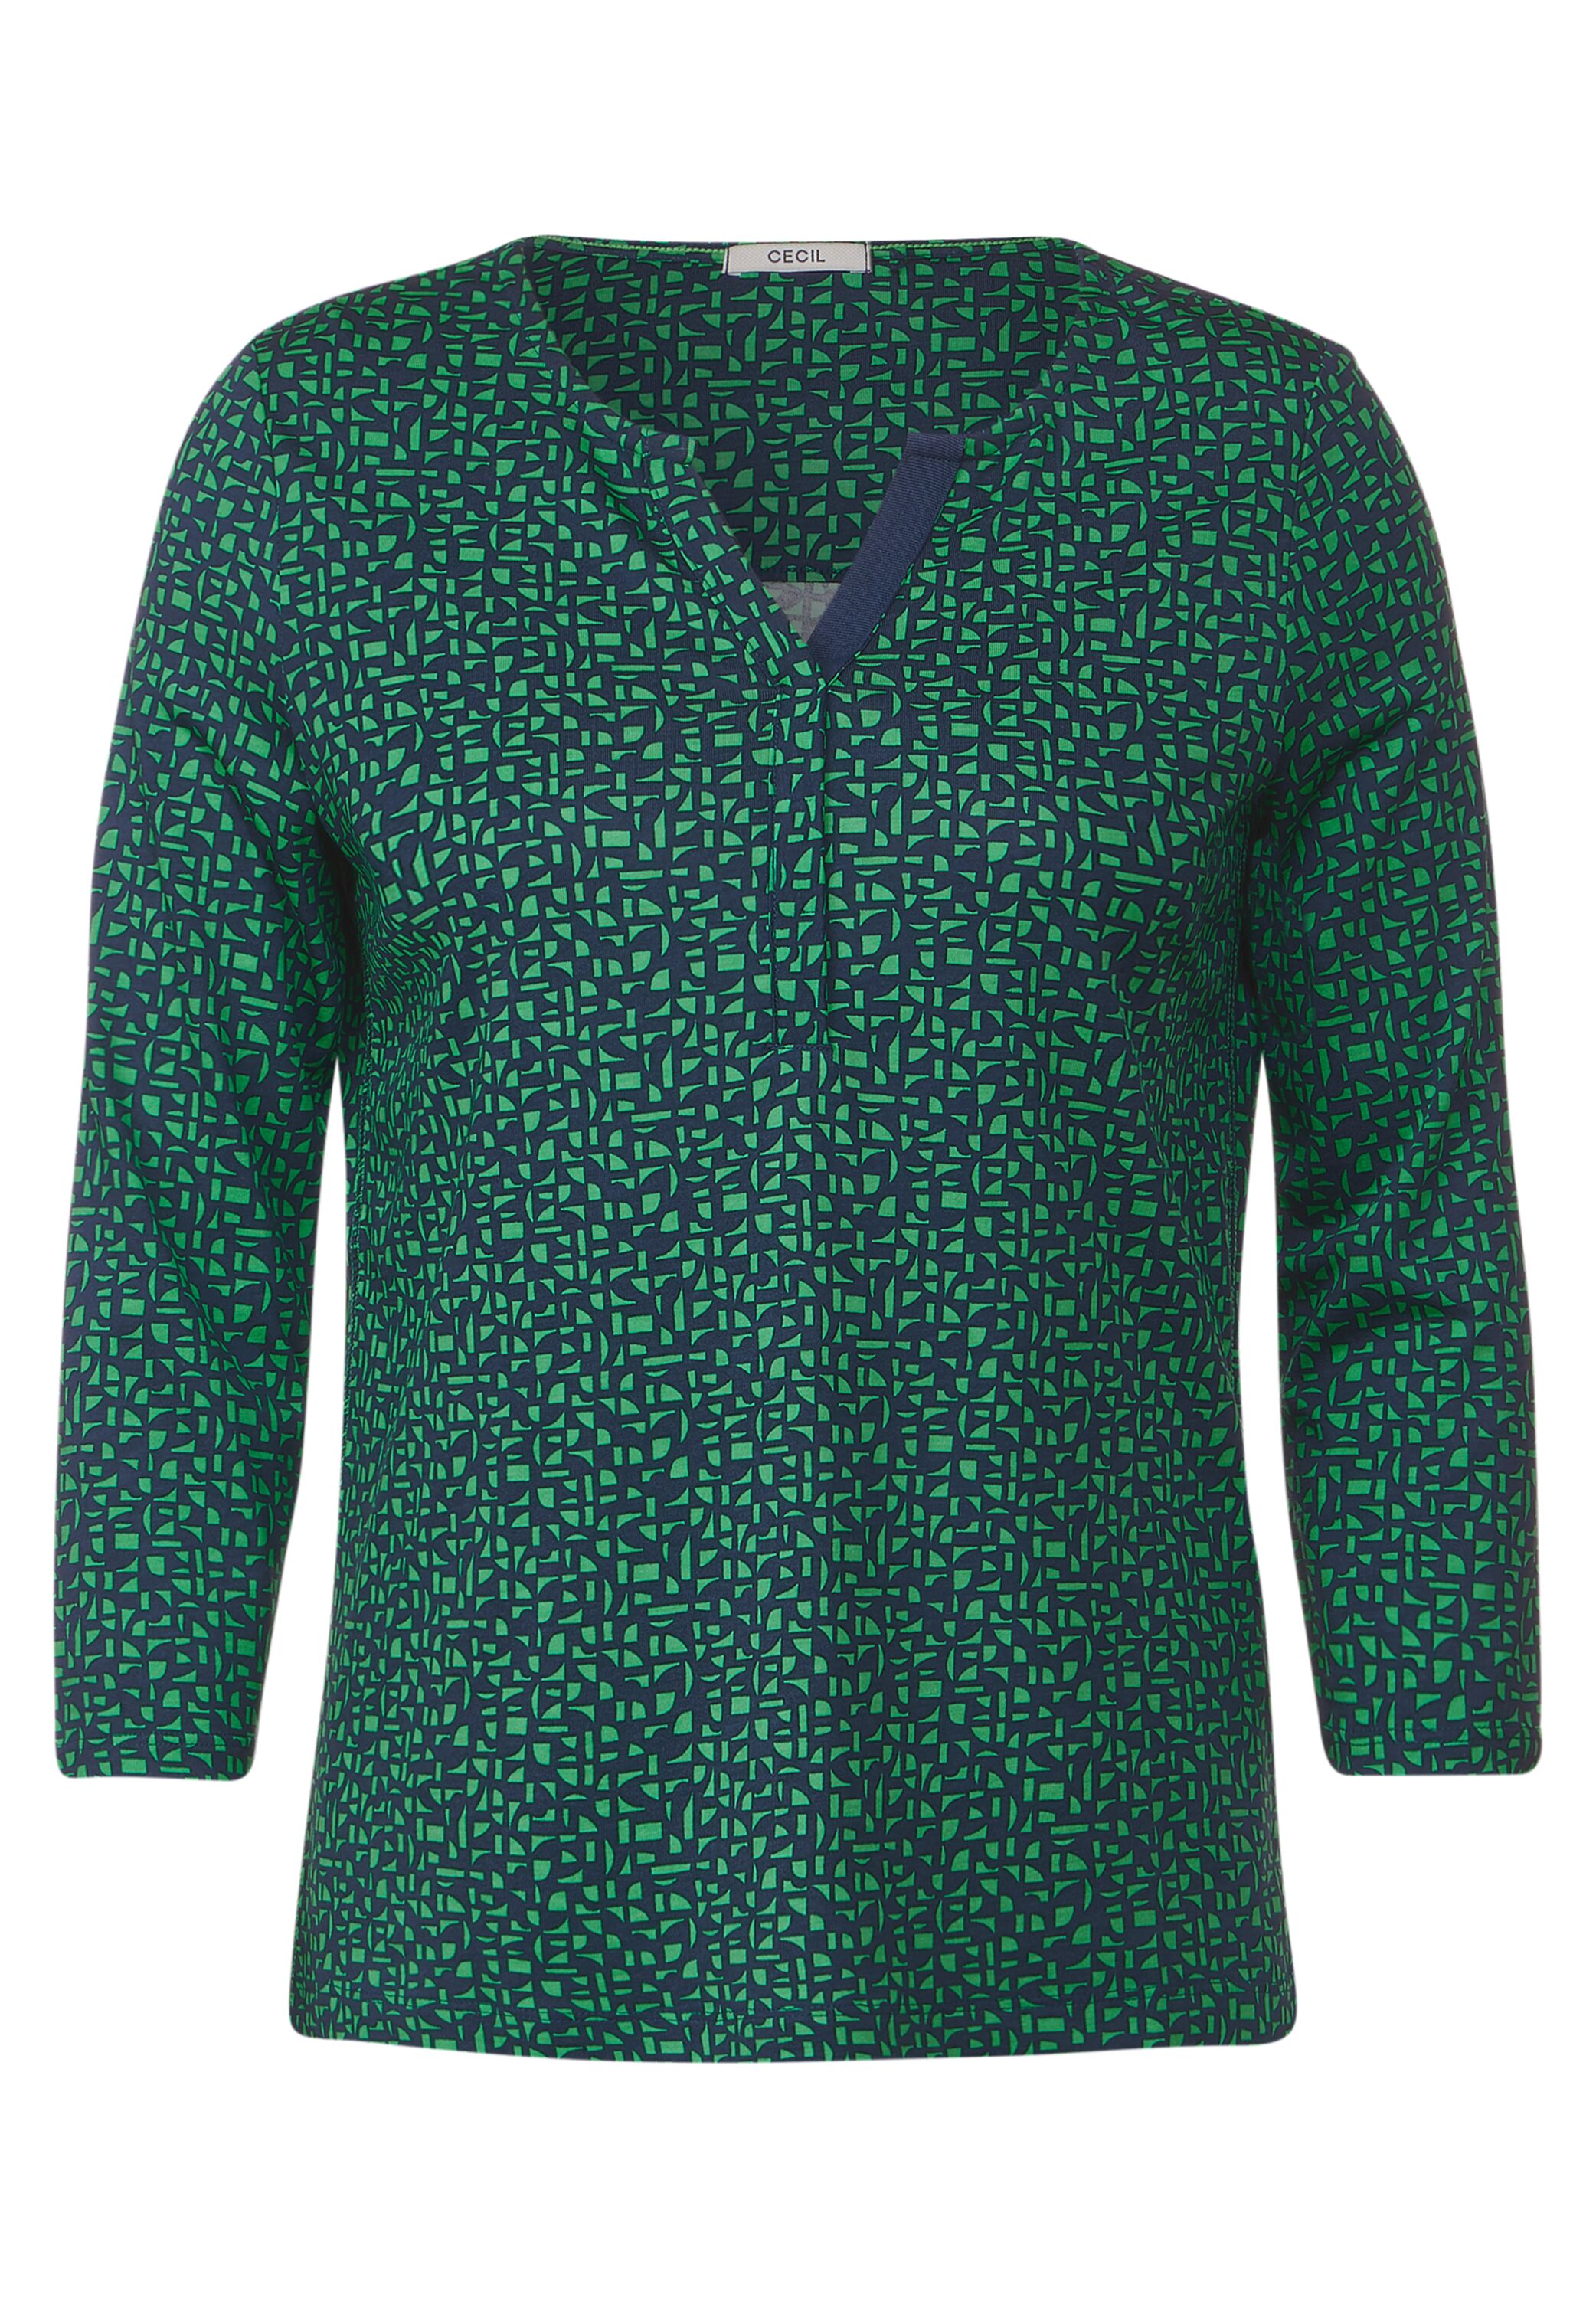 CECIL Printshirt in Celery Green B320875-25455 - CONCEPT Mode